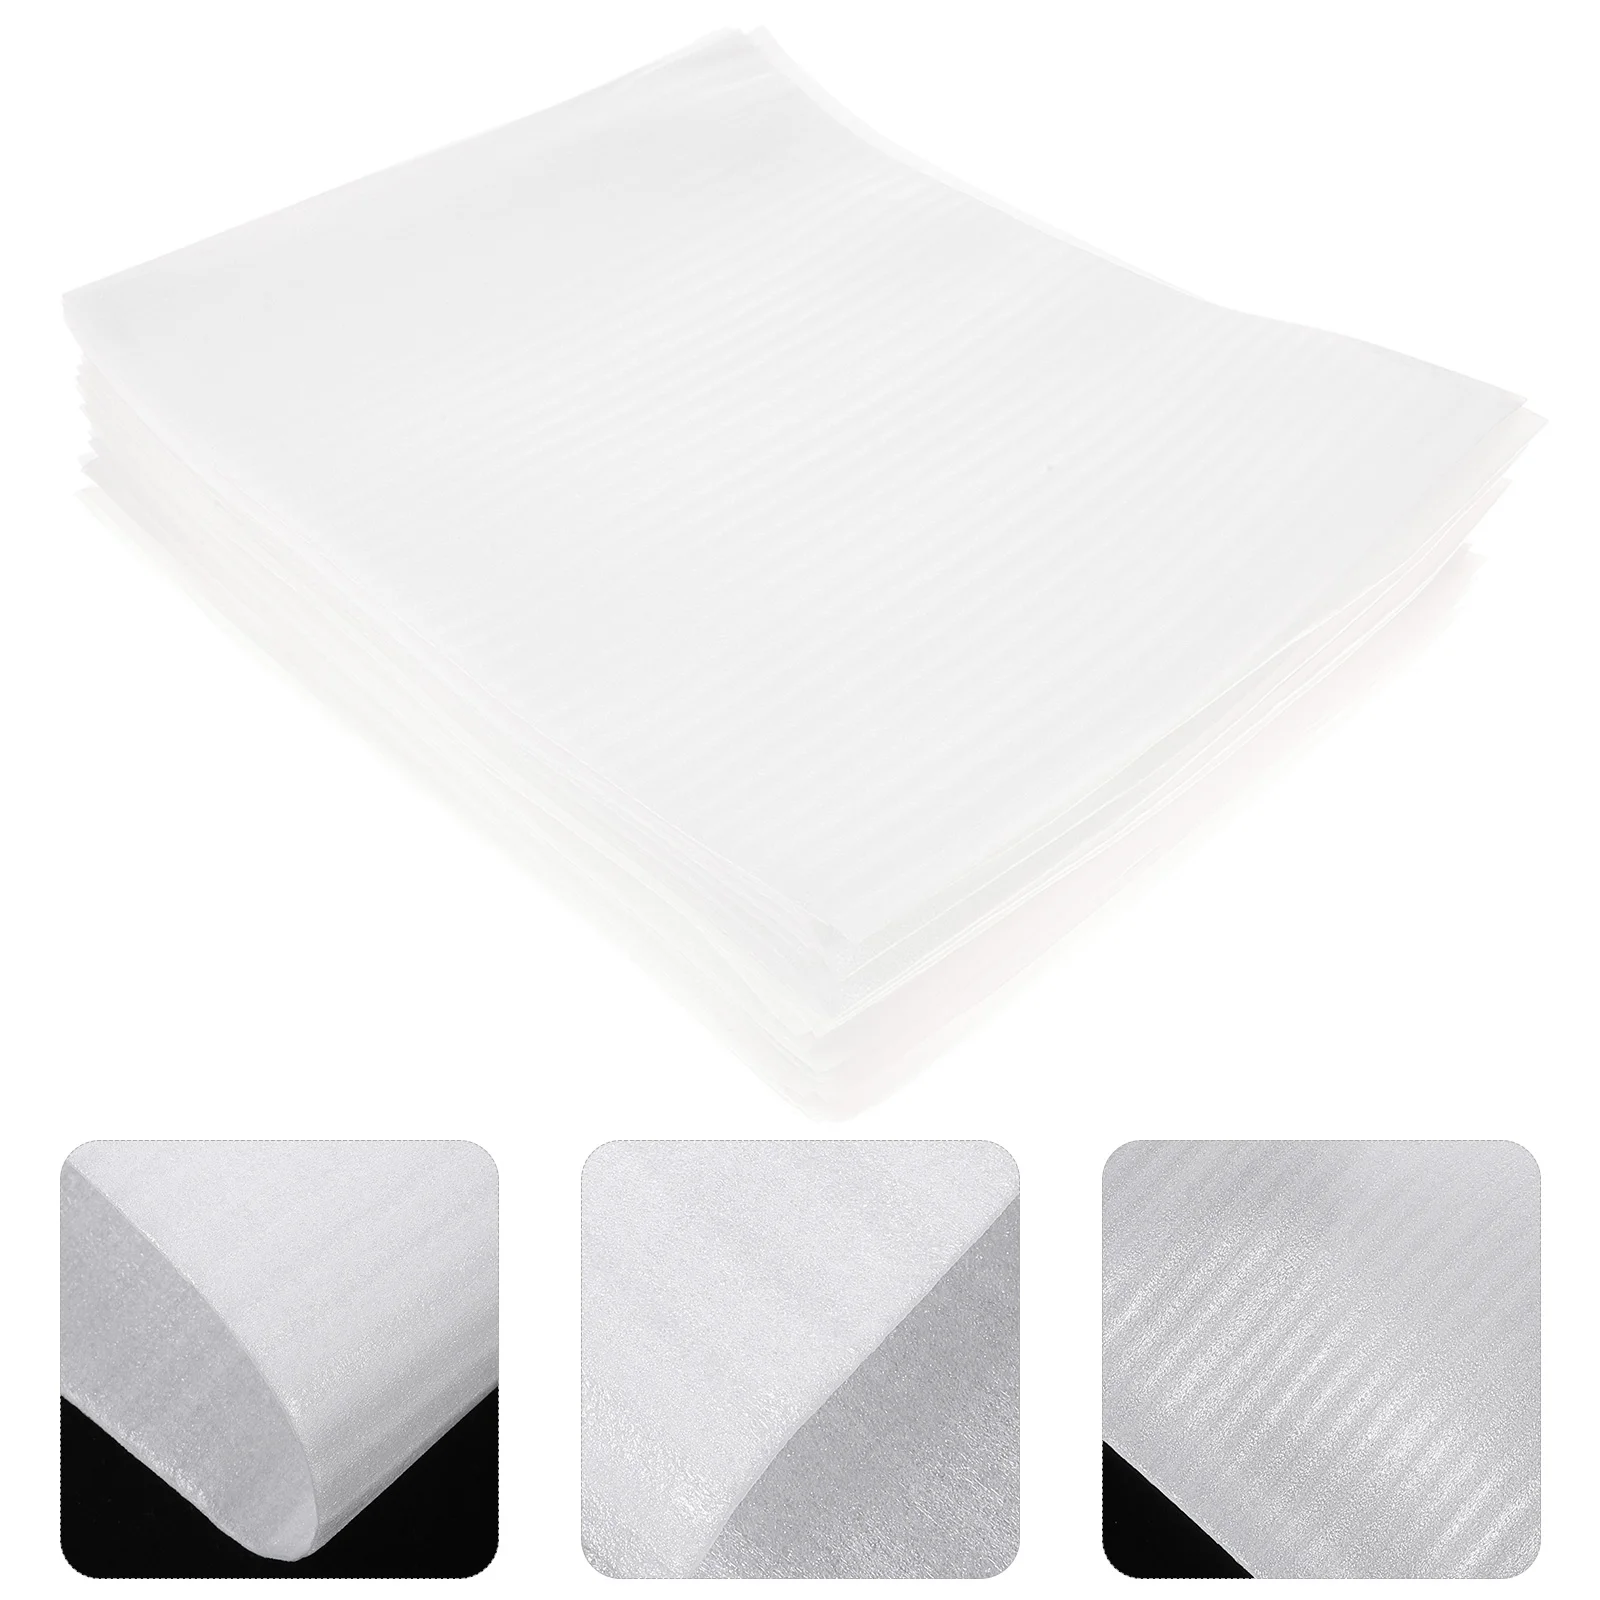 

100pcs Cushion Pouches Anti- static Pouches Shockproof Electronic Product Packing Supplies Wraps for Storage